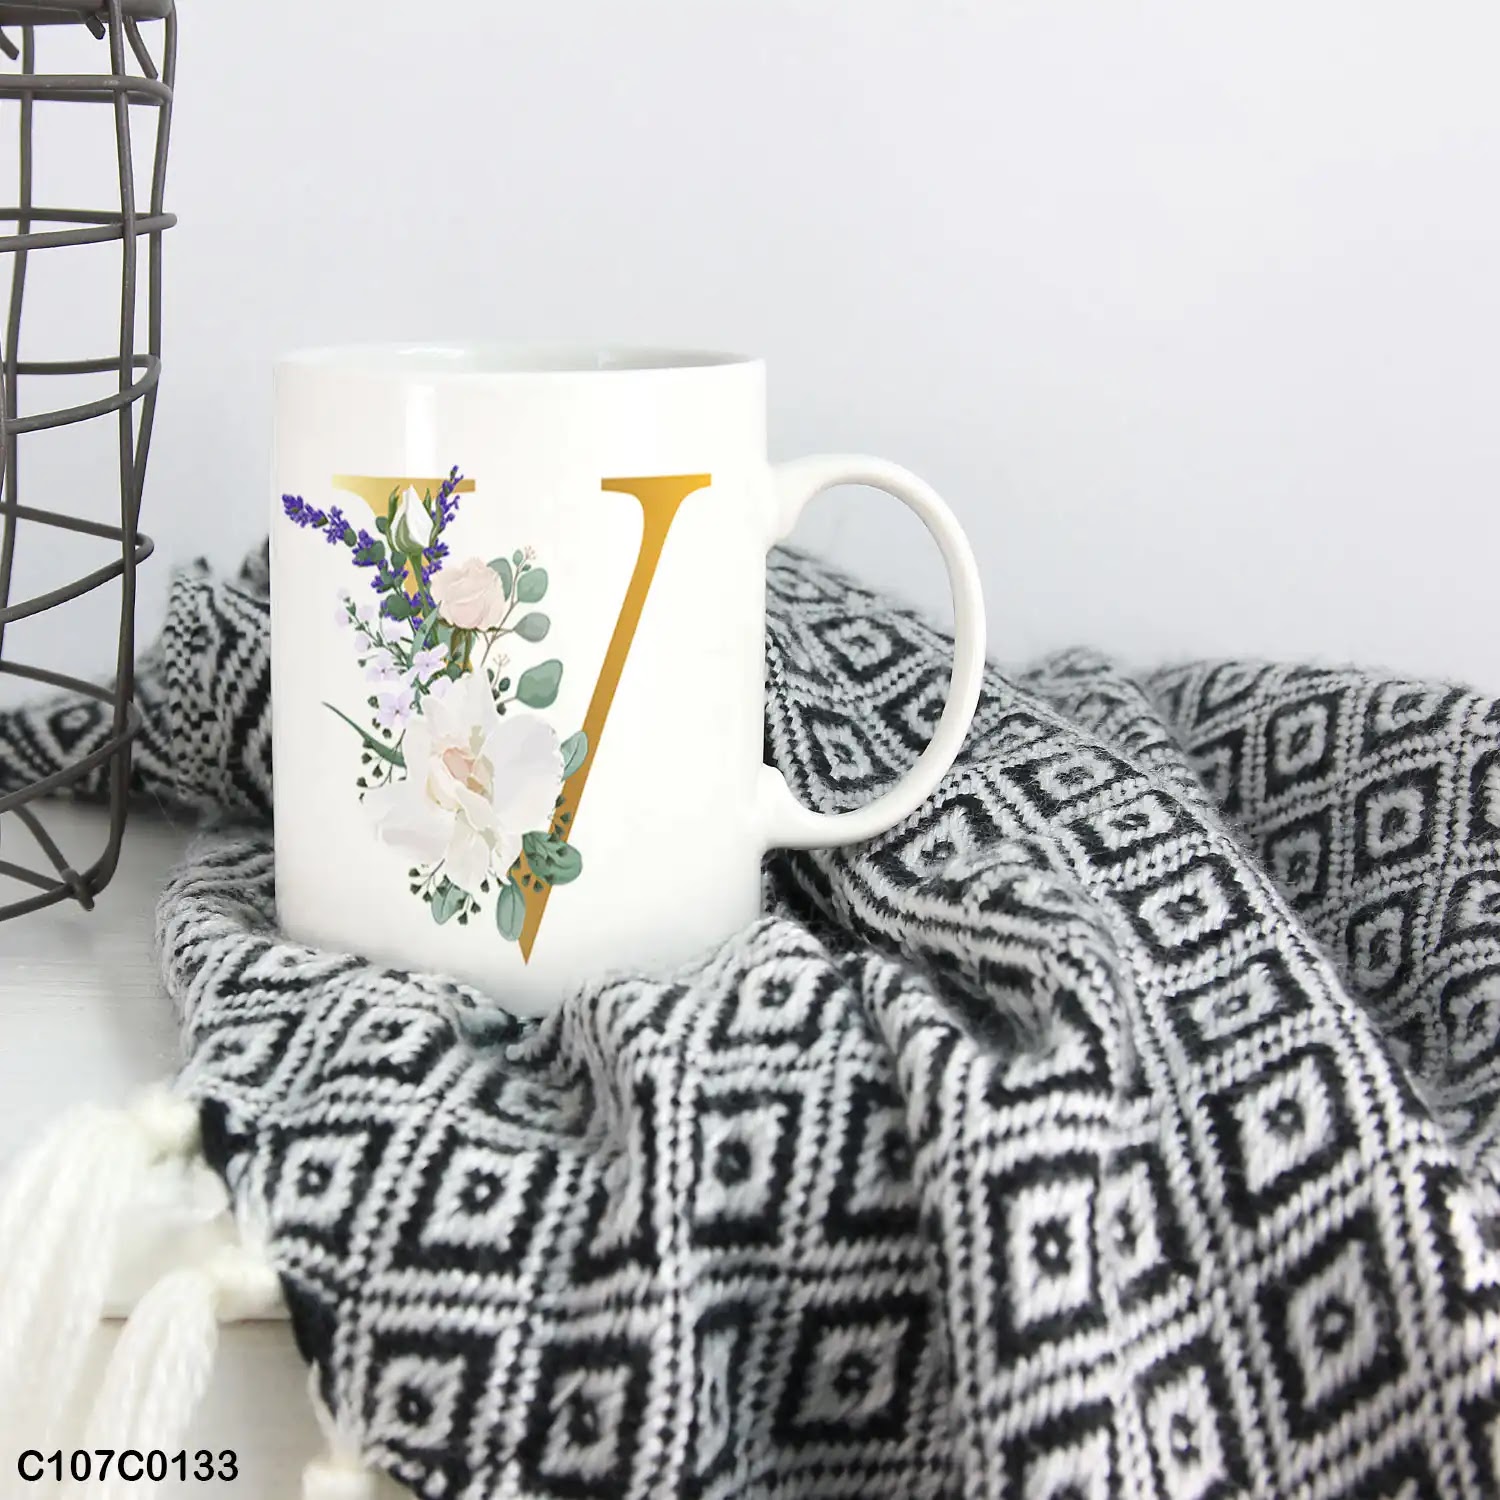 A white mug (cup) printed with gold Letter "V" and small white branch